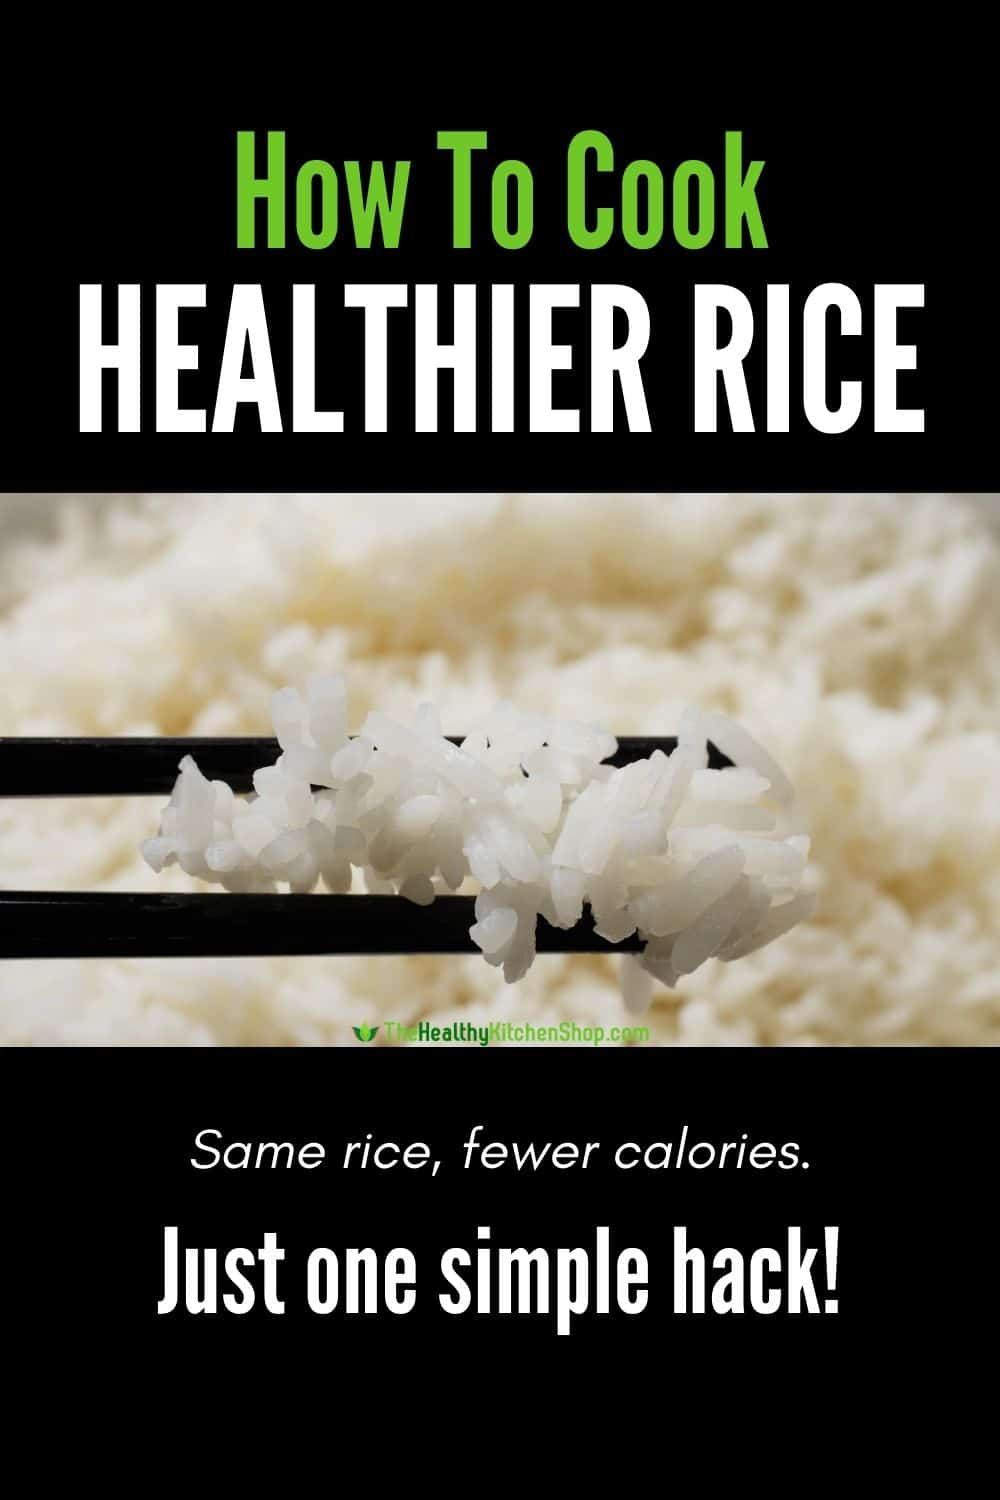 How To Cook Healthier Rice